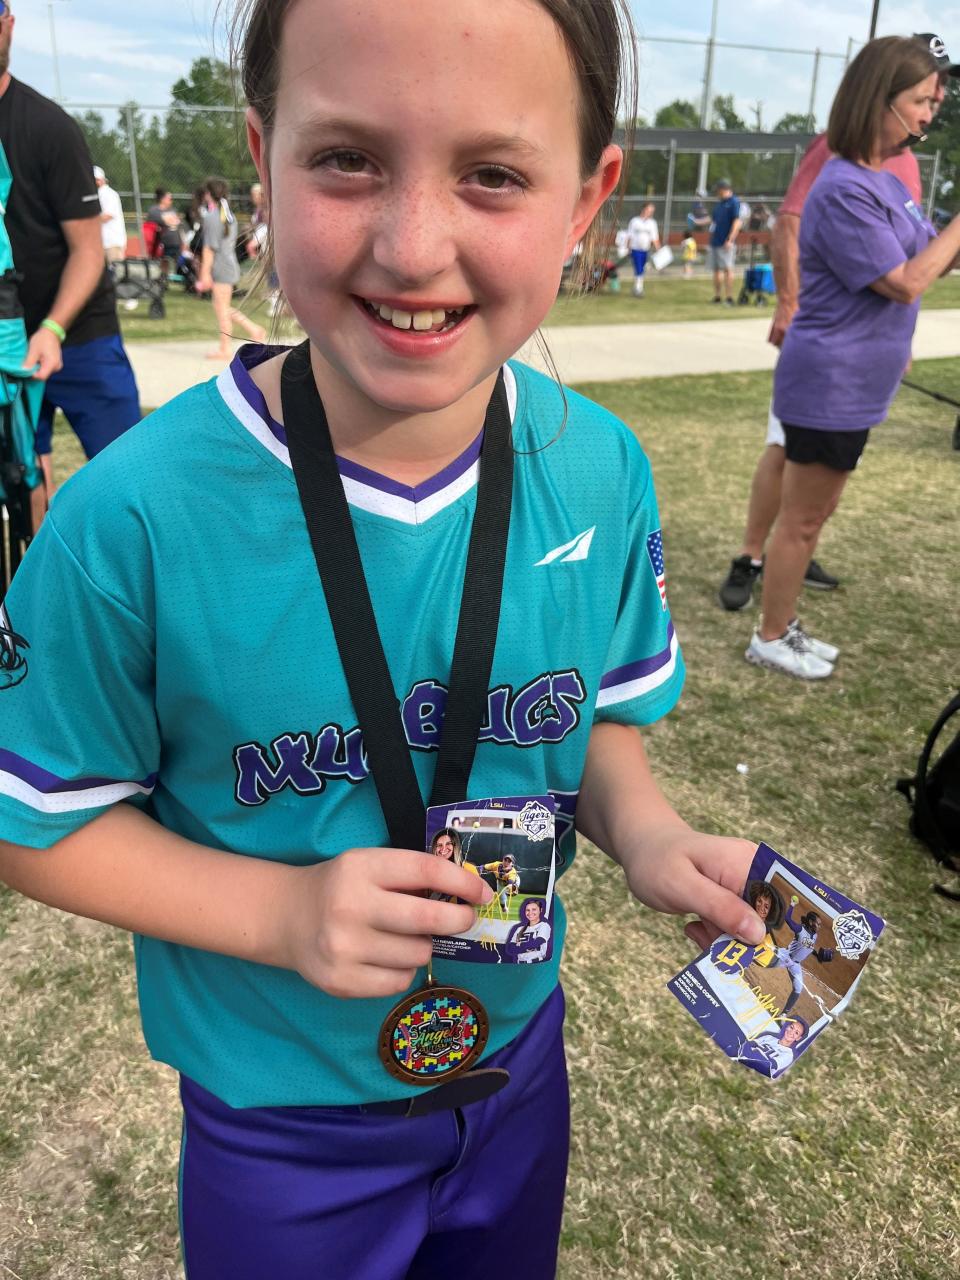 Jolie Normand poses with her LSU trading cards during a softball tournament with the 10U Mudbugs team. (Photo courtesy of Leslie and Mark Normand).